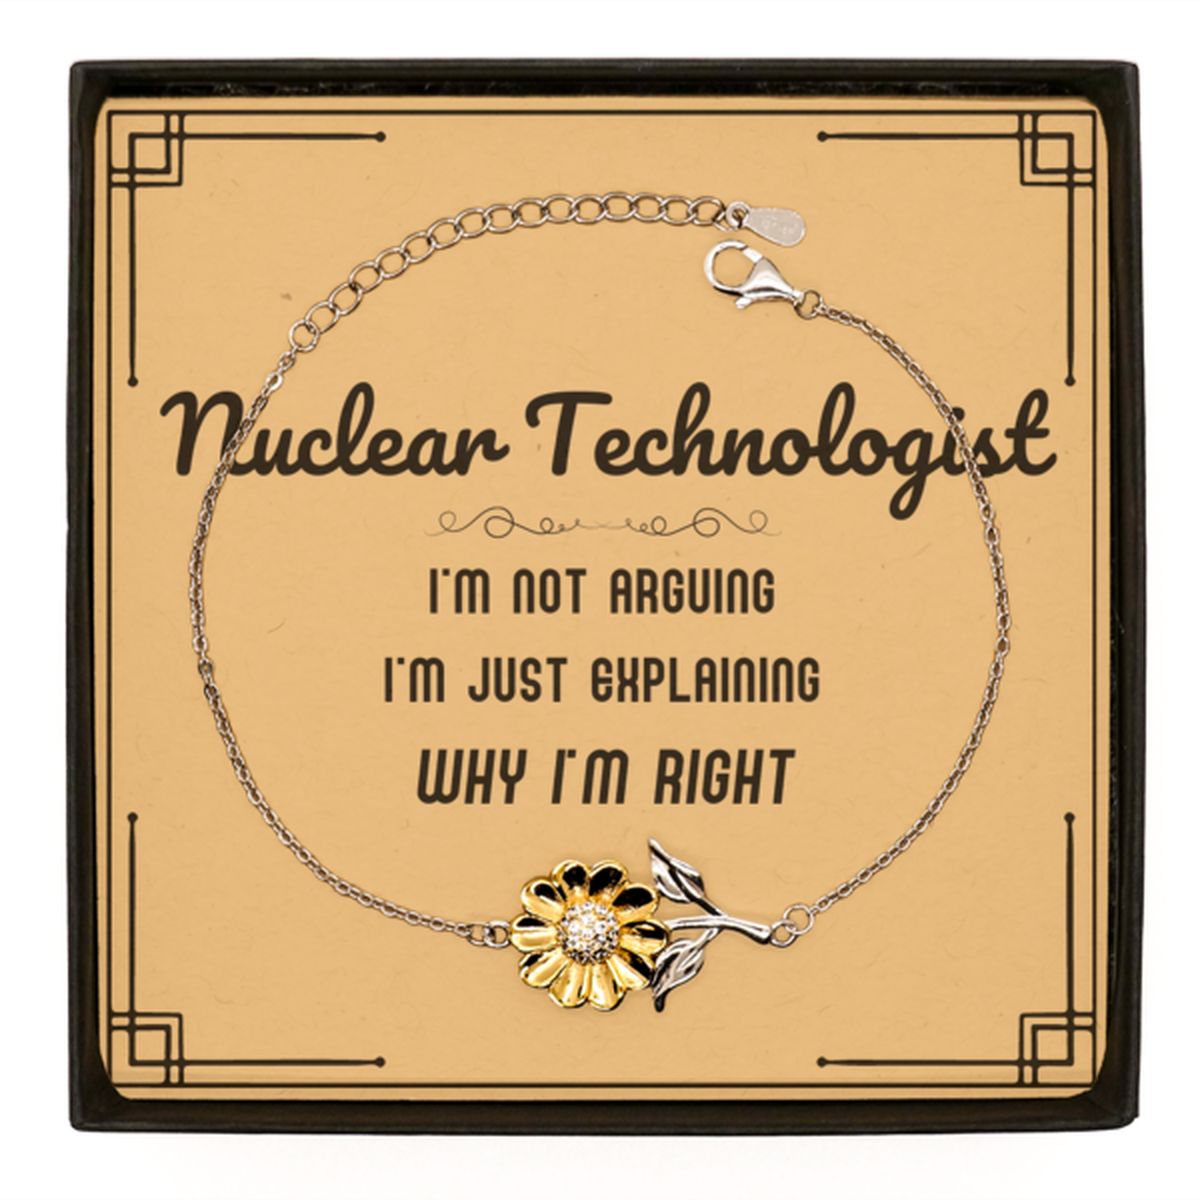 Nuclear Technologist I'm not Arguing. I'm Just Explaining Why I'm RIGHT Sunflower Bracelet, Funny Saying Quote Nuclear Technologist Gifts For Nuclear Technologist Message Card Graduation Birthday Christmas Gifts for Men Women Coworker